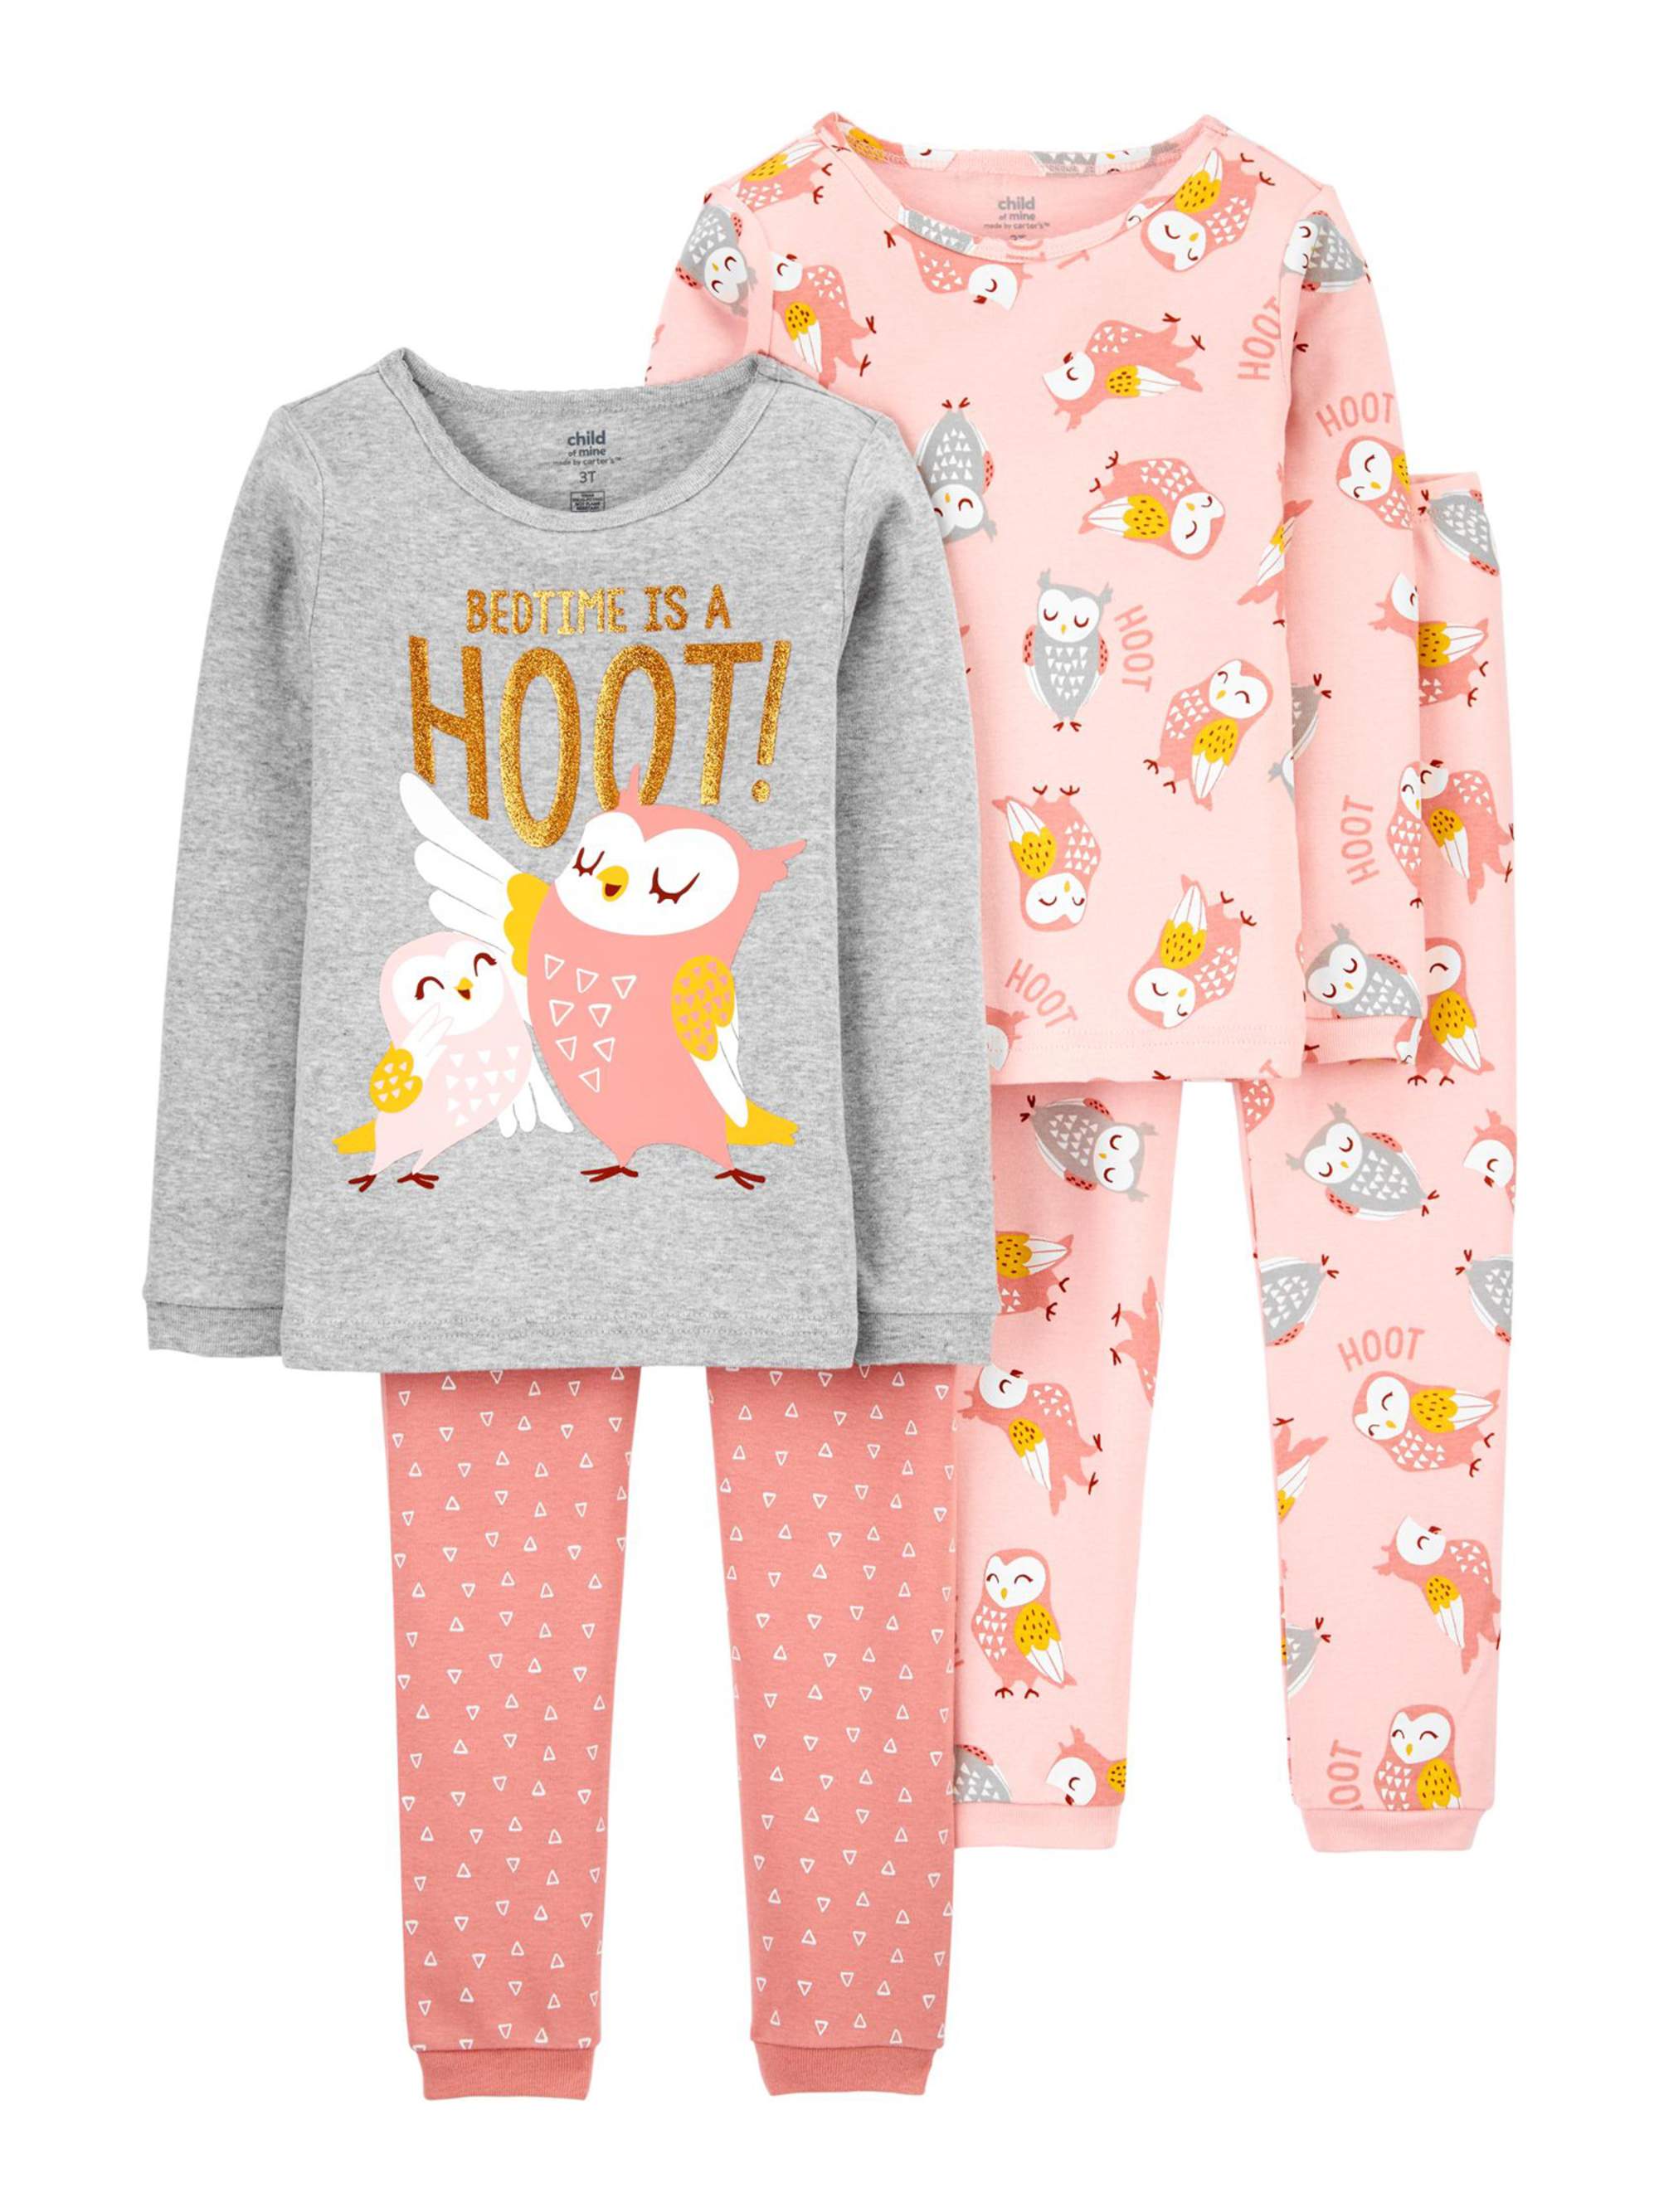 Carter's Child of Mine Baby and Toddler Girl Long Sleeve Snug-Fit Pajamas, 4-Piece, Sizes 6M-5T - image 1 of 2